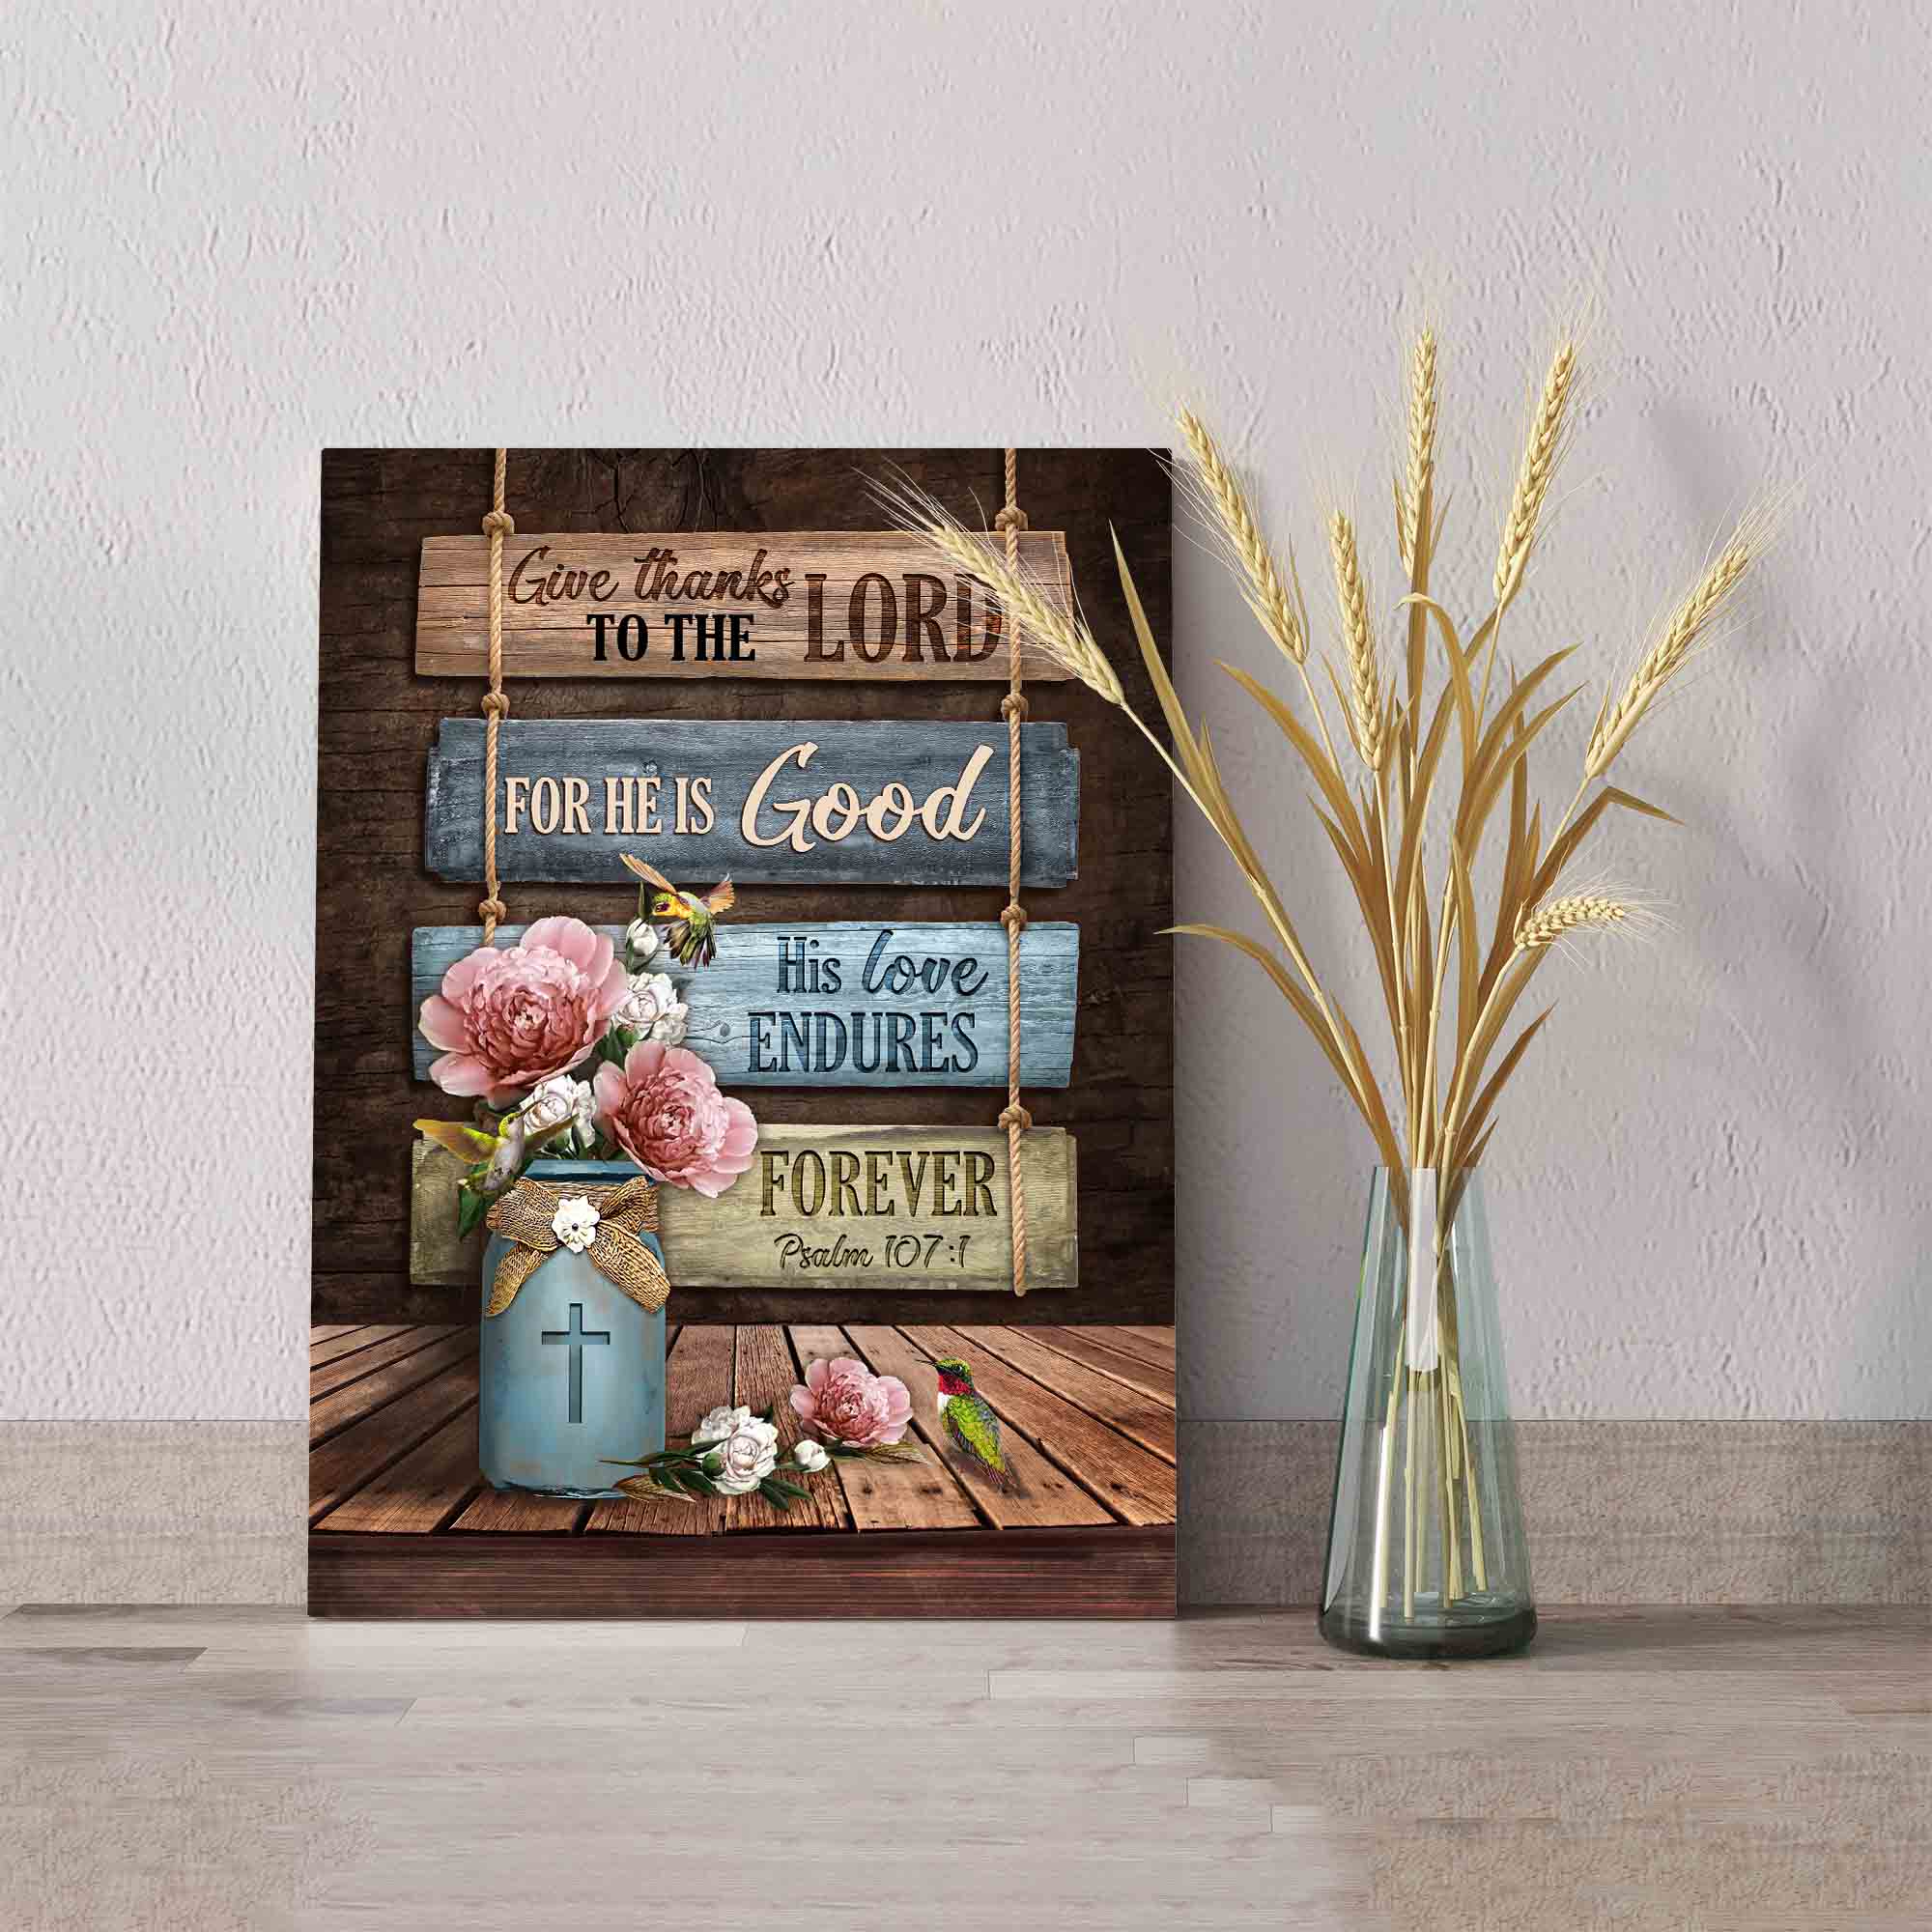 Give Thanks To The Lord Canvas, Roses Canvas, Hummingbird Canvas, Canvas Wall Art, Gift Canvas